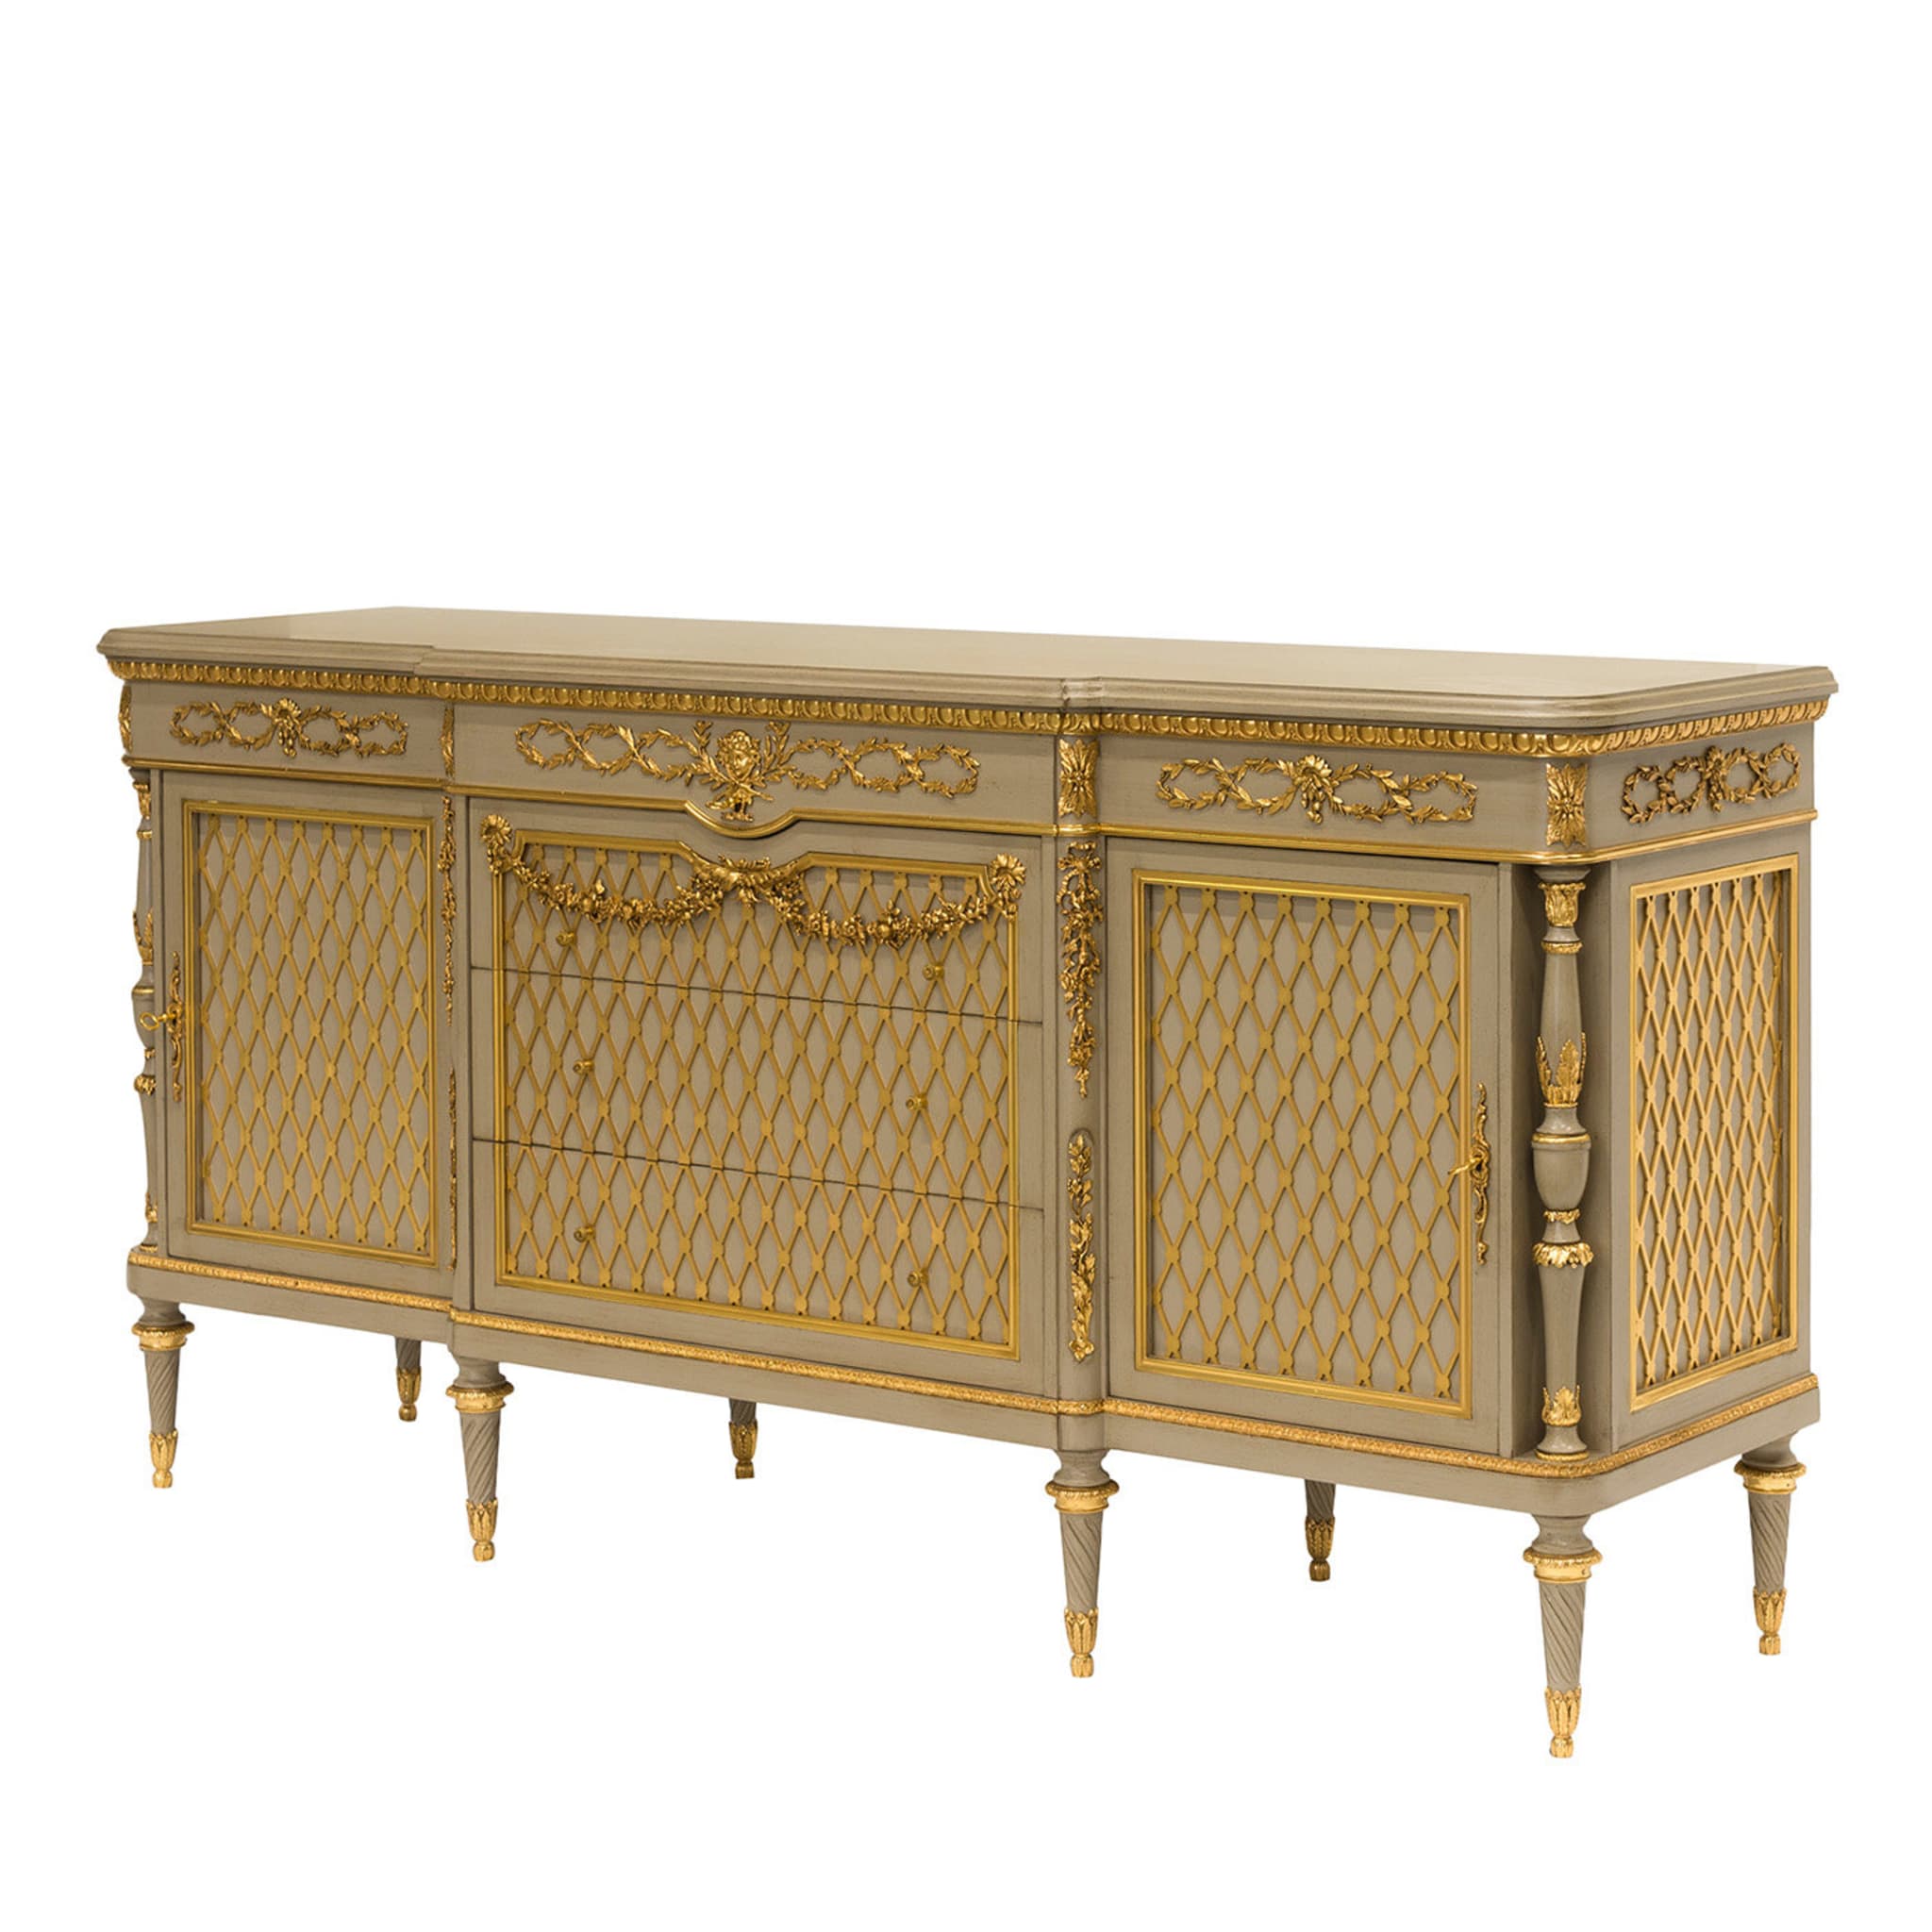 FRENCH TRANSITIONAL STYLE SIDEBOARD - Main view